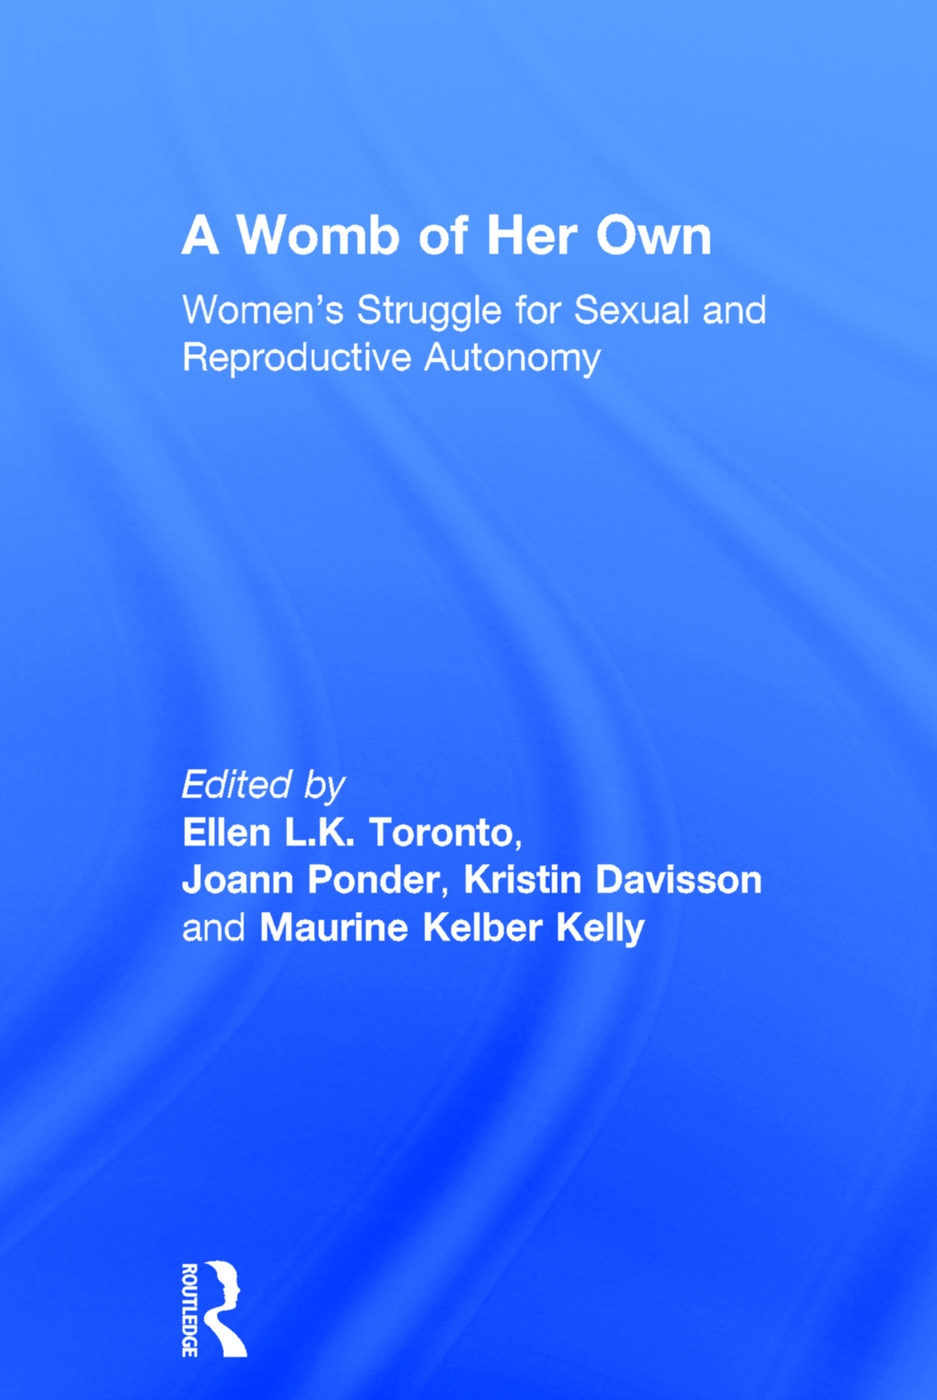 A Womb of Her Own: Women’s Struggle for Sexual and Reproductive Autonomy